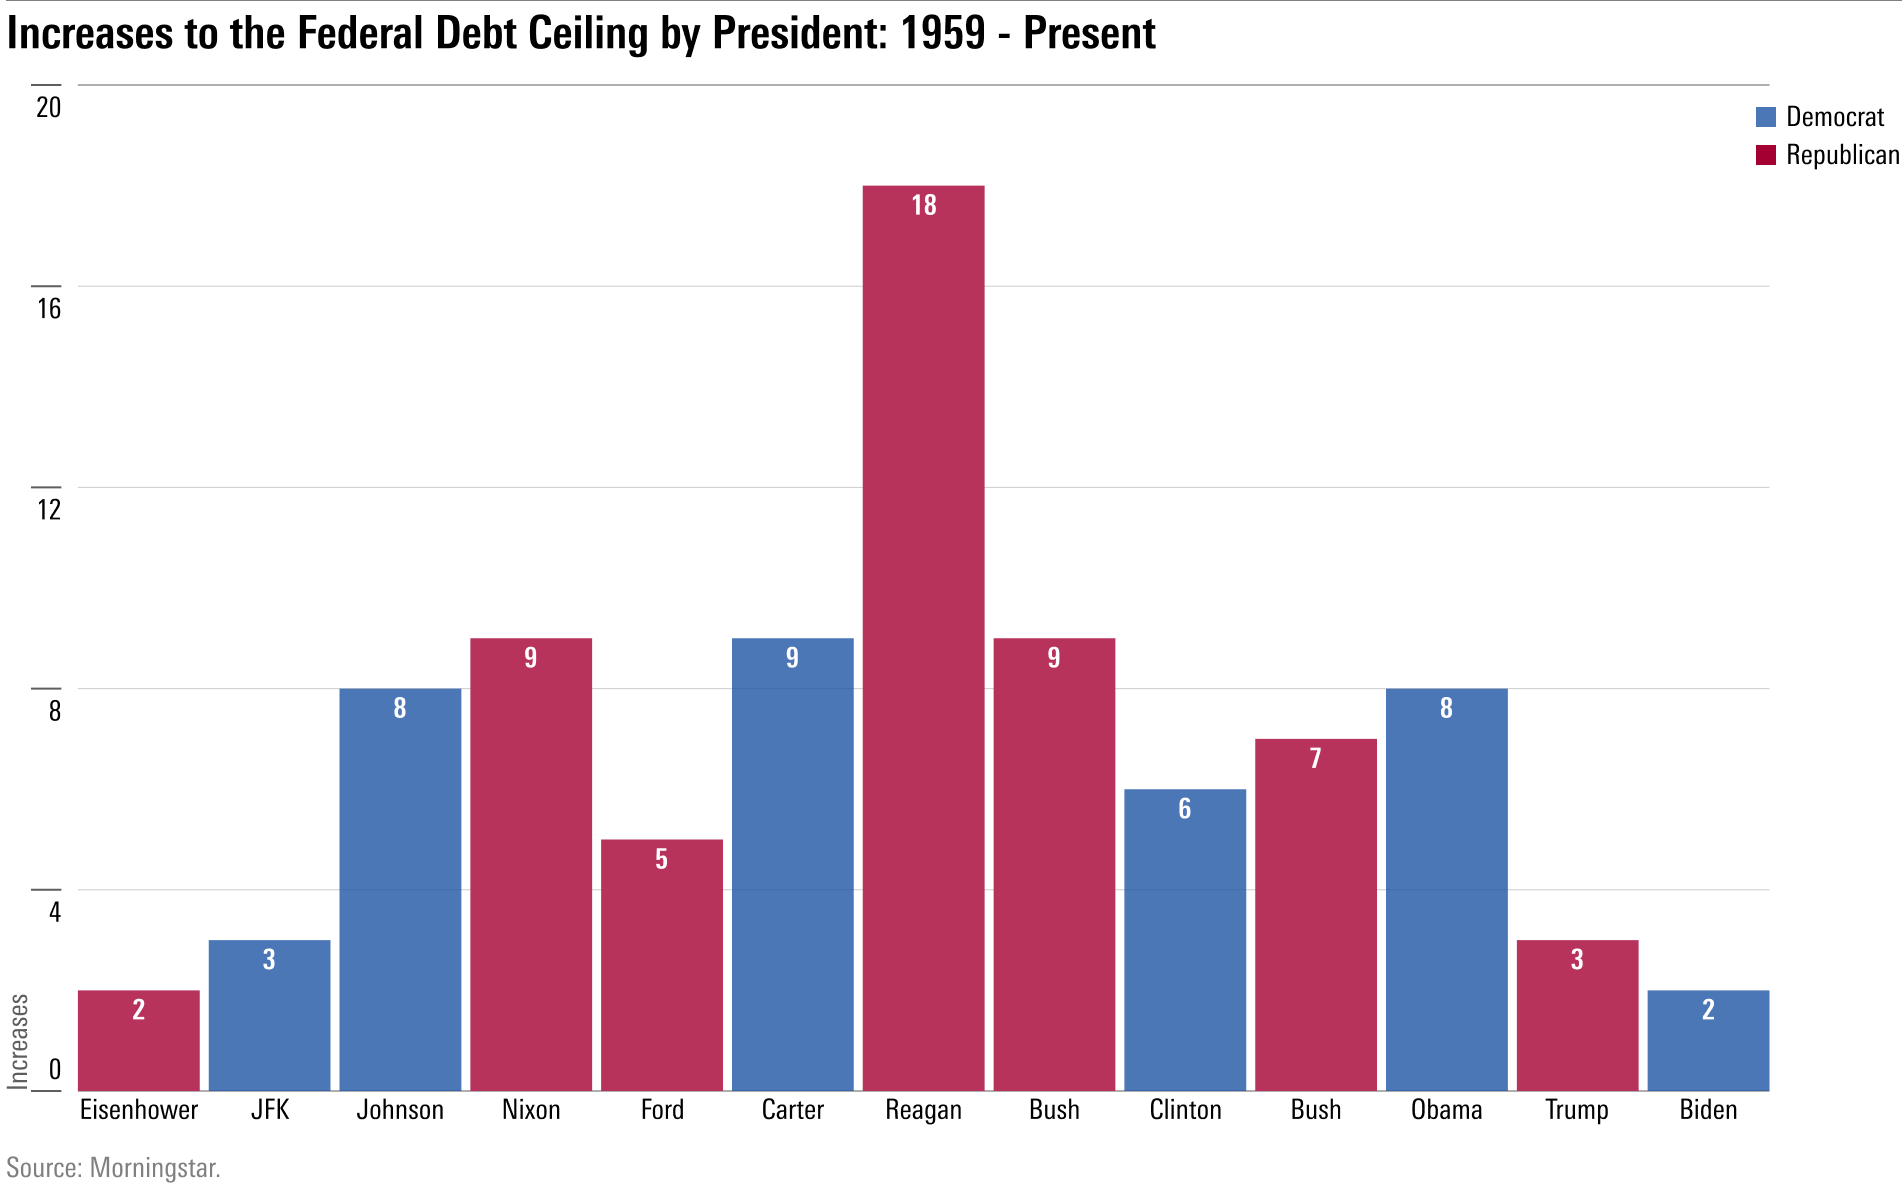 A bar chart showing the Increases to the federal debt ceiling made by each president since 1959.